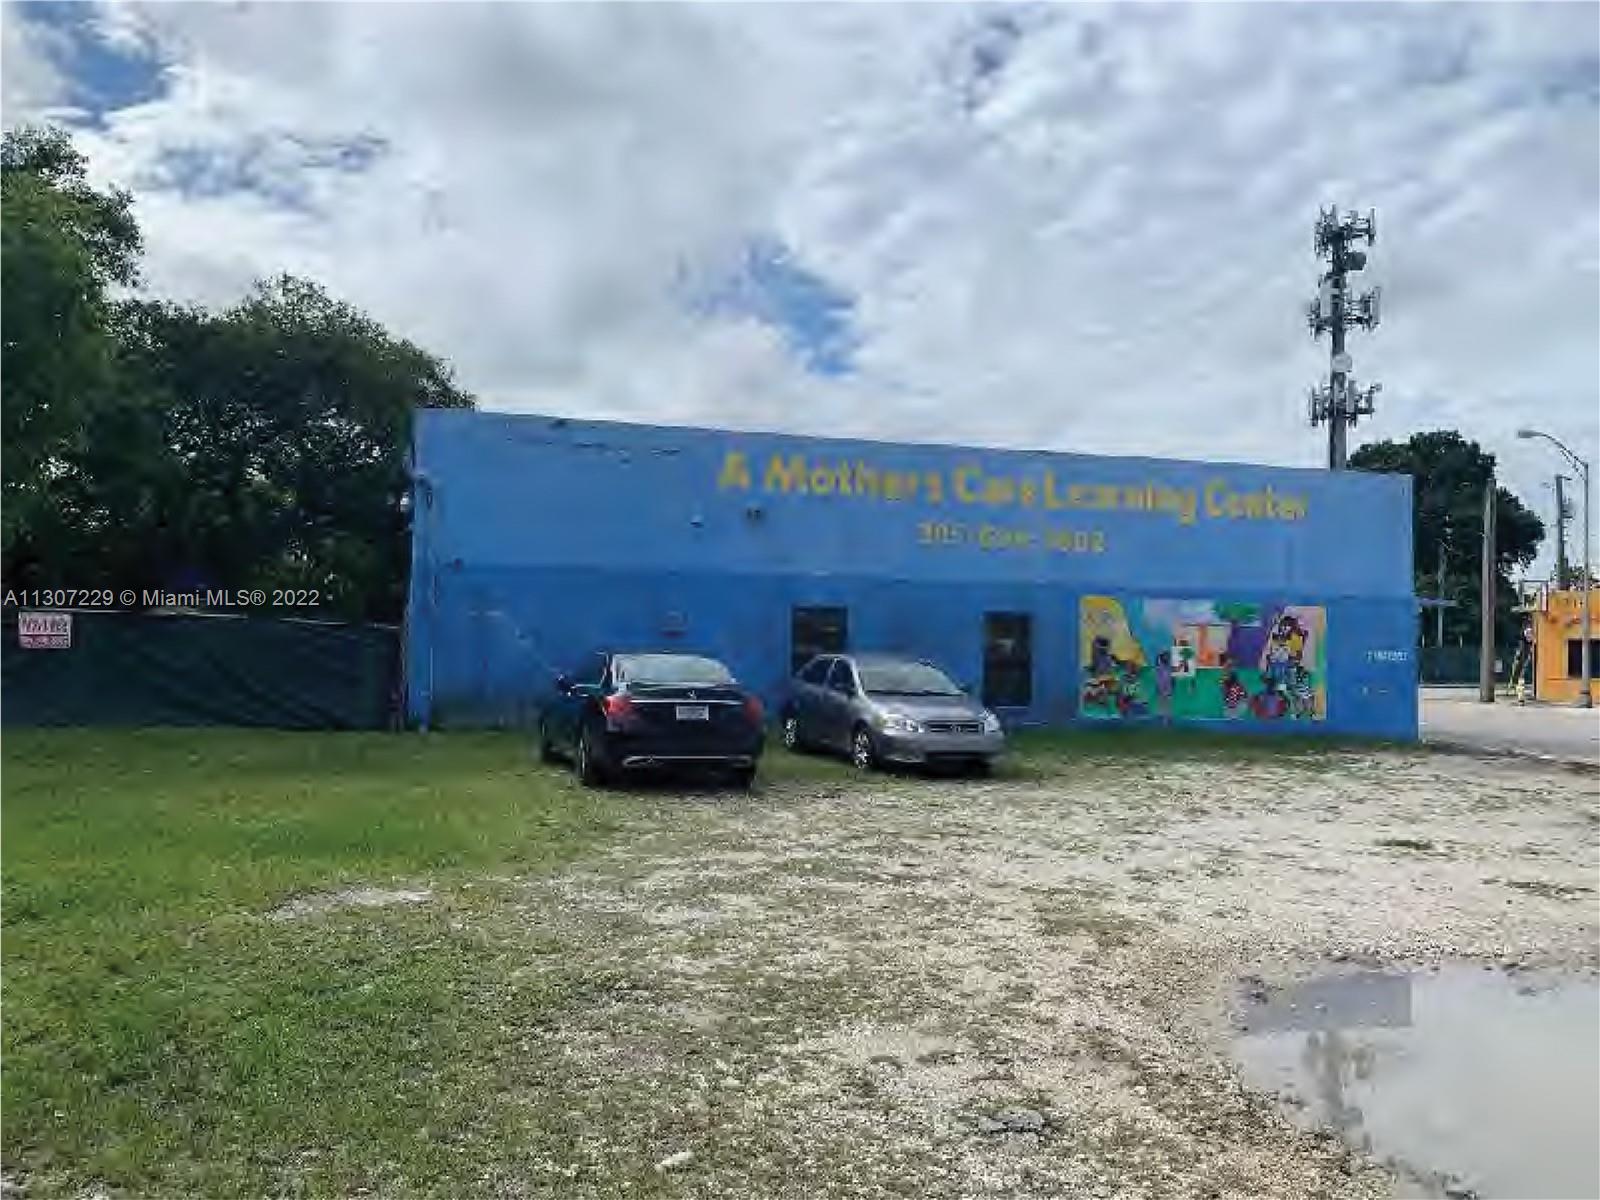 Primary Building, North Side.  This empty parcel belongs to City of Miami.